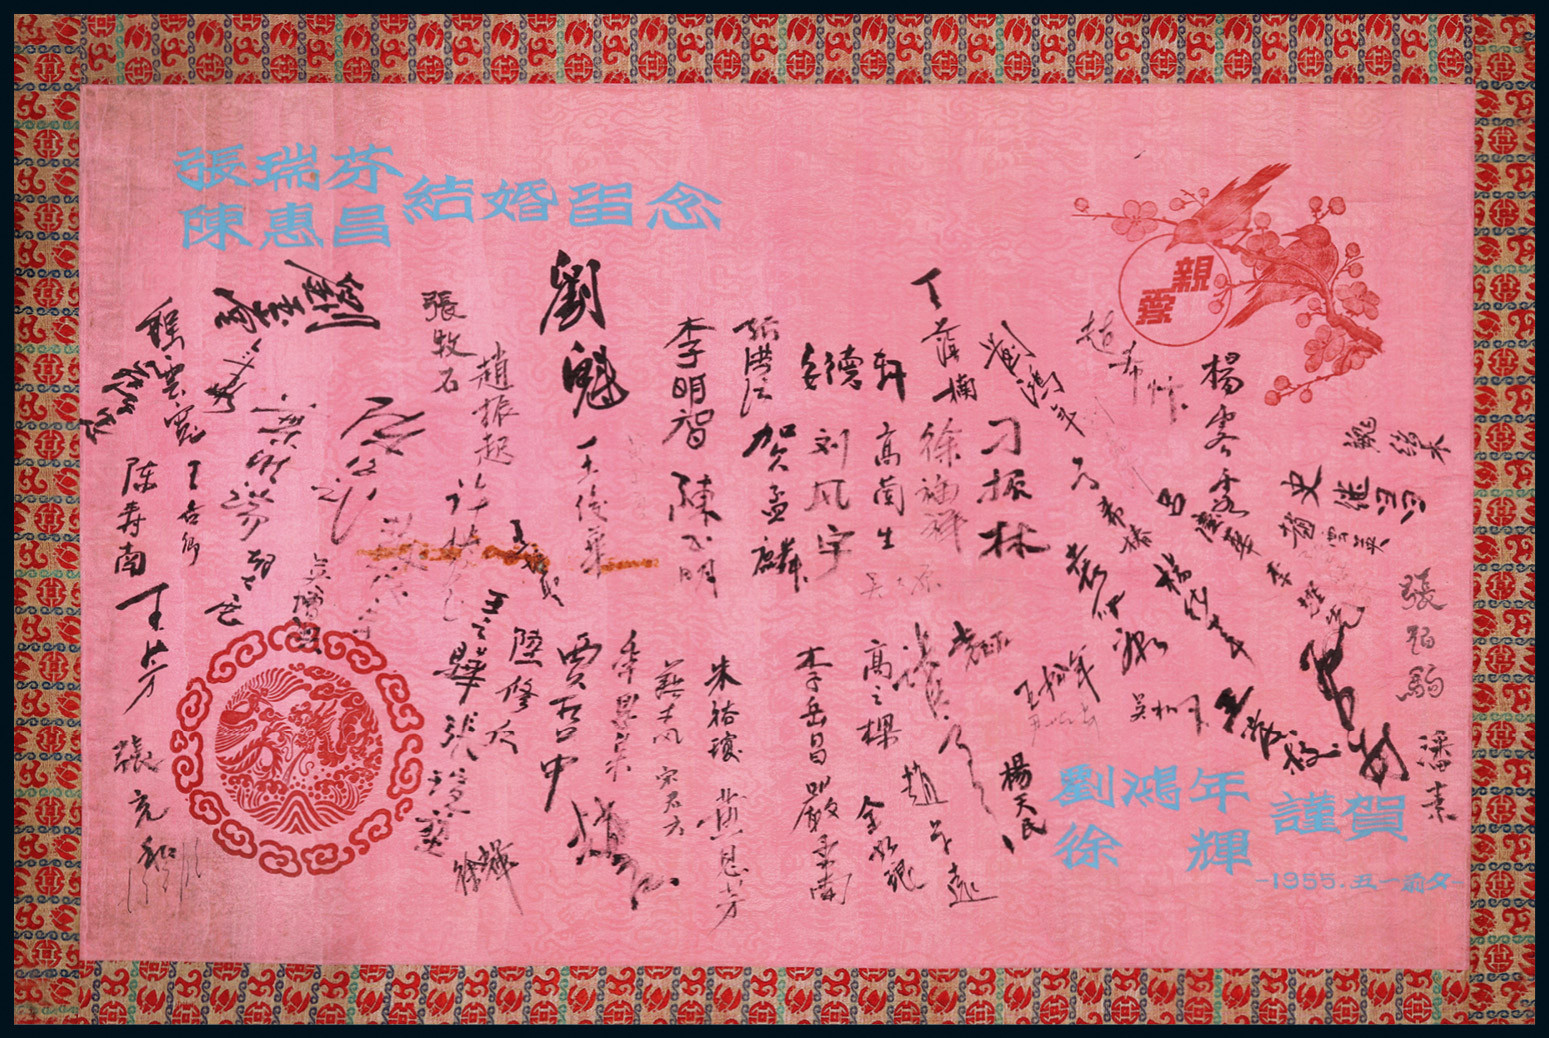 A wedding memorial book signed by Zhang Boju, Pan Su, Zhang Chonghe and others